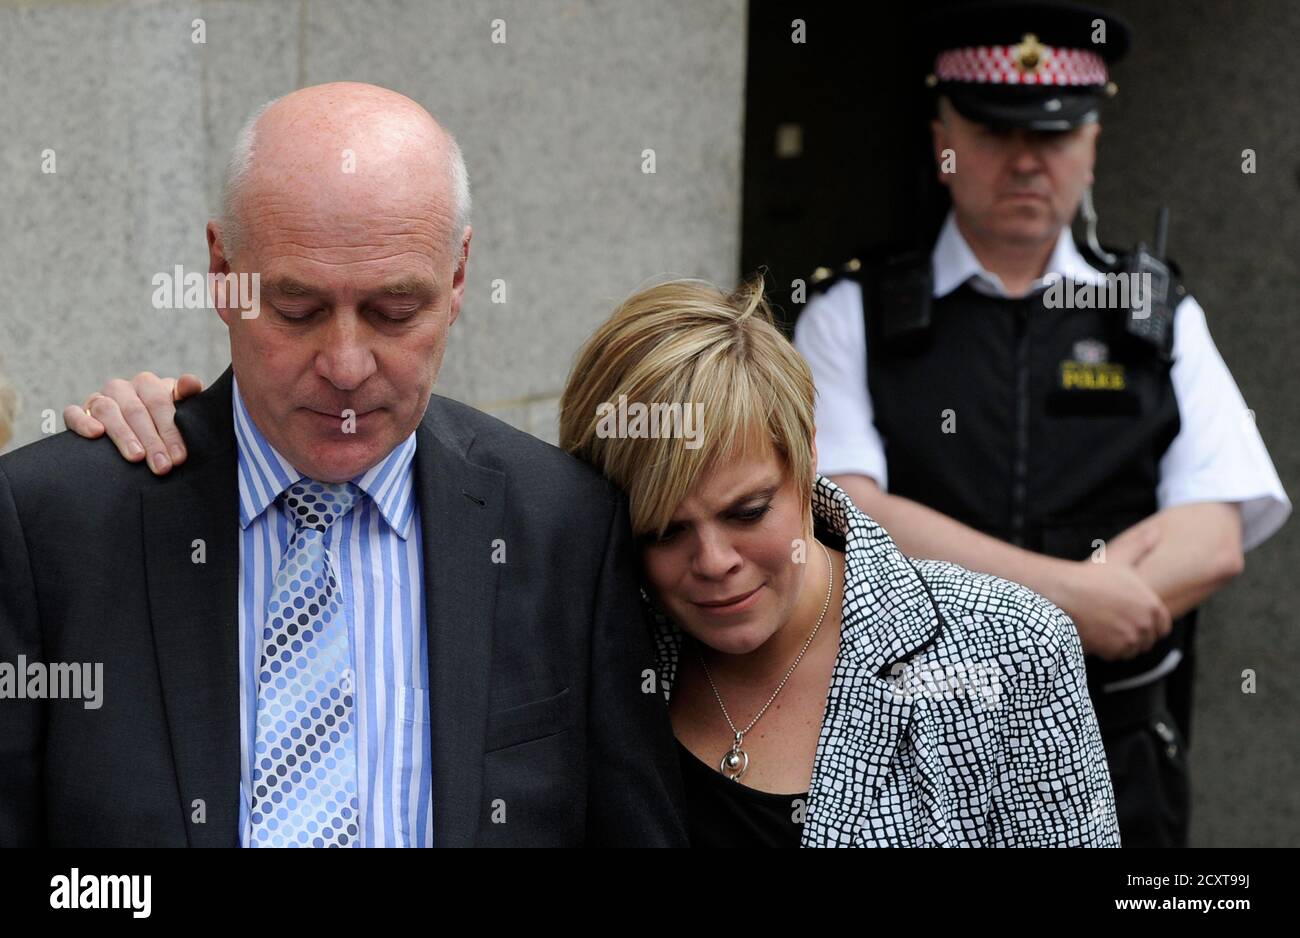 Bob Dowler, father of slain schoolgirl Milly Dowler, reads a statement next to his daughter Gemma (C) outside The Old Bailey courthouse in London June 24, 2011. A jury which found convicted killer Levi Bellfield guilty of murdering Milly Dowler in 2002 and was deliberating over whether he also tried to kidnap another young girl has been discharged because of adverse media publicity. The former nightclub doorman was convicted at the Old Bailey of killing the 13-year-old after she walked past his home in Walton on Thames, Surrey.  REUTERS/Paul Hackett  (BRITAIN - Tags: CRIME LAW) Stock Photo